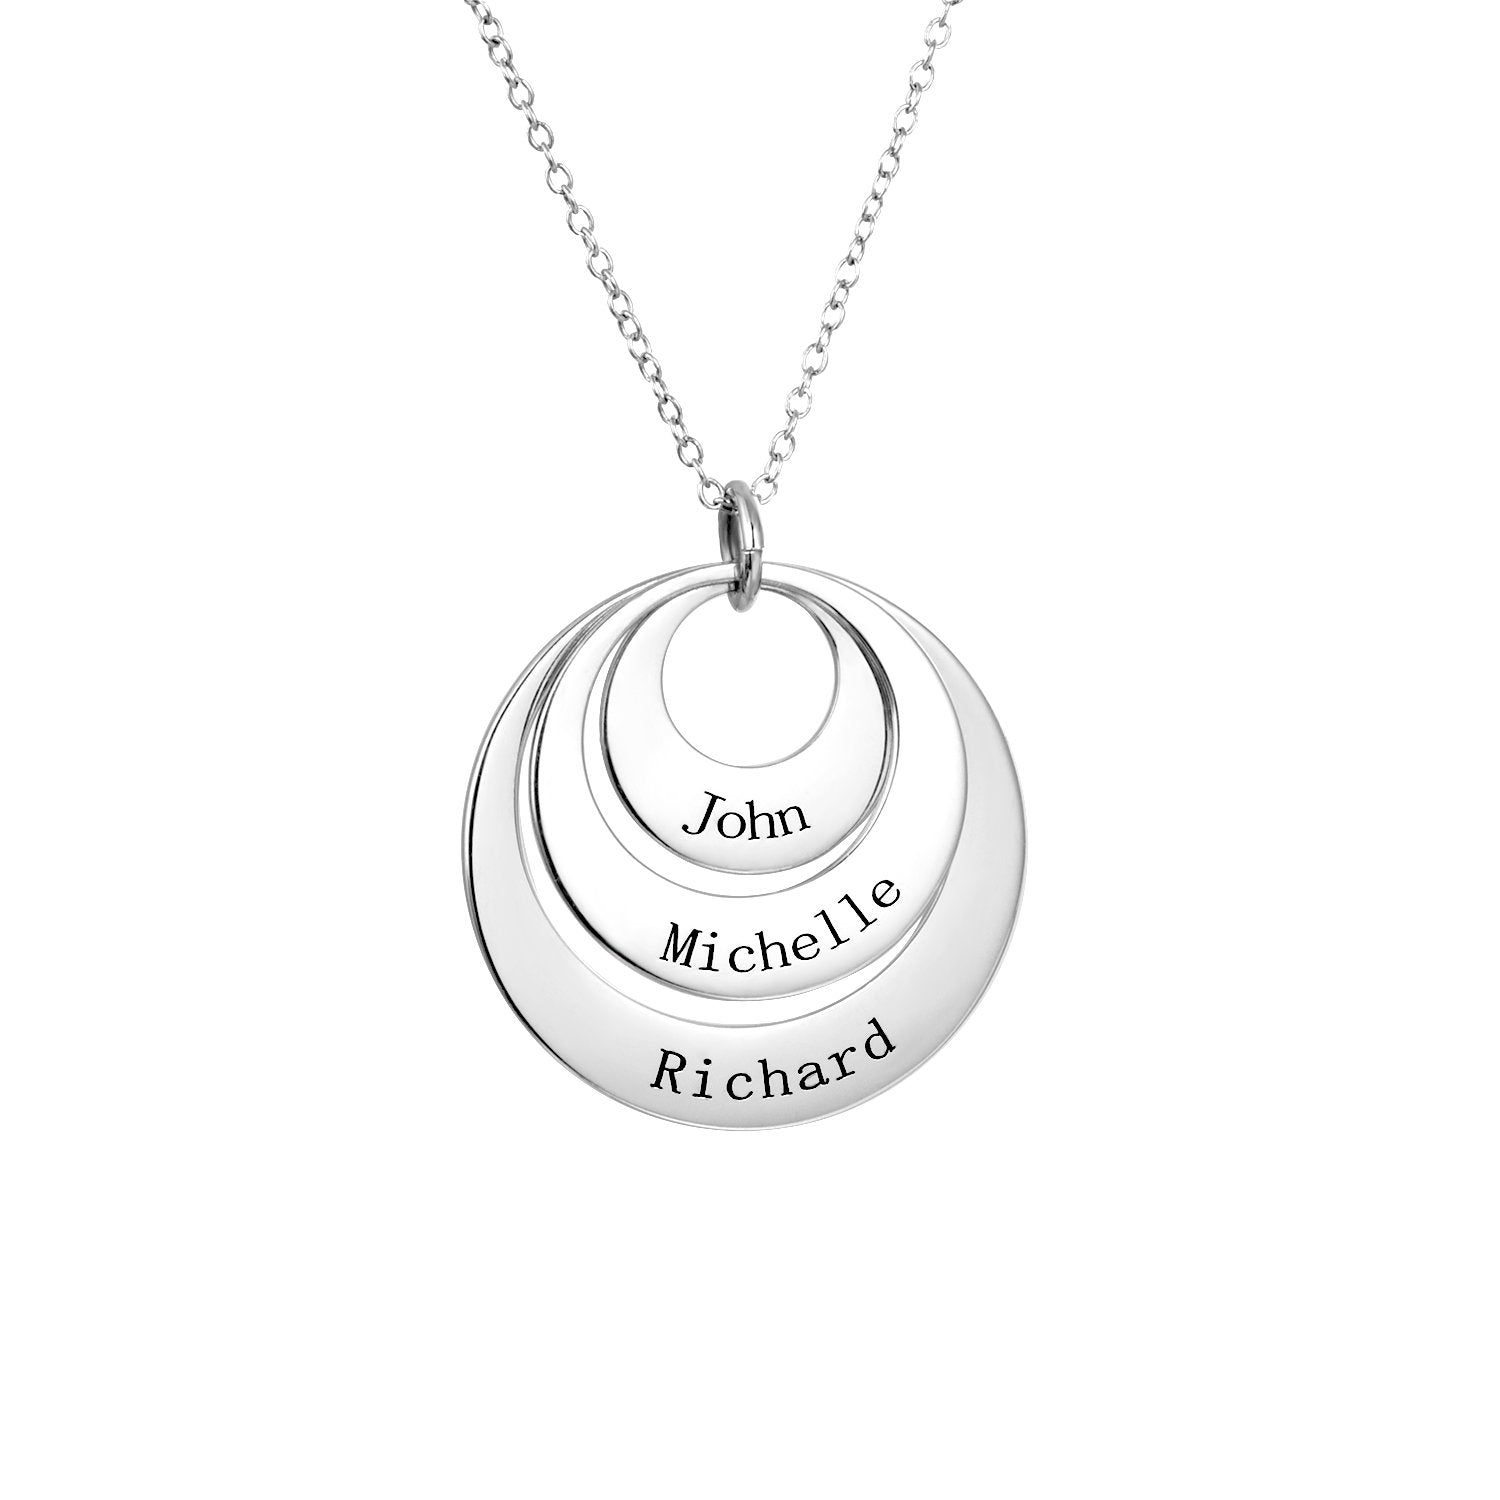 925 Sterling Silver Personalized Engravable Three Disc Necklace Adjustable 16”-20”